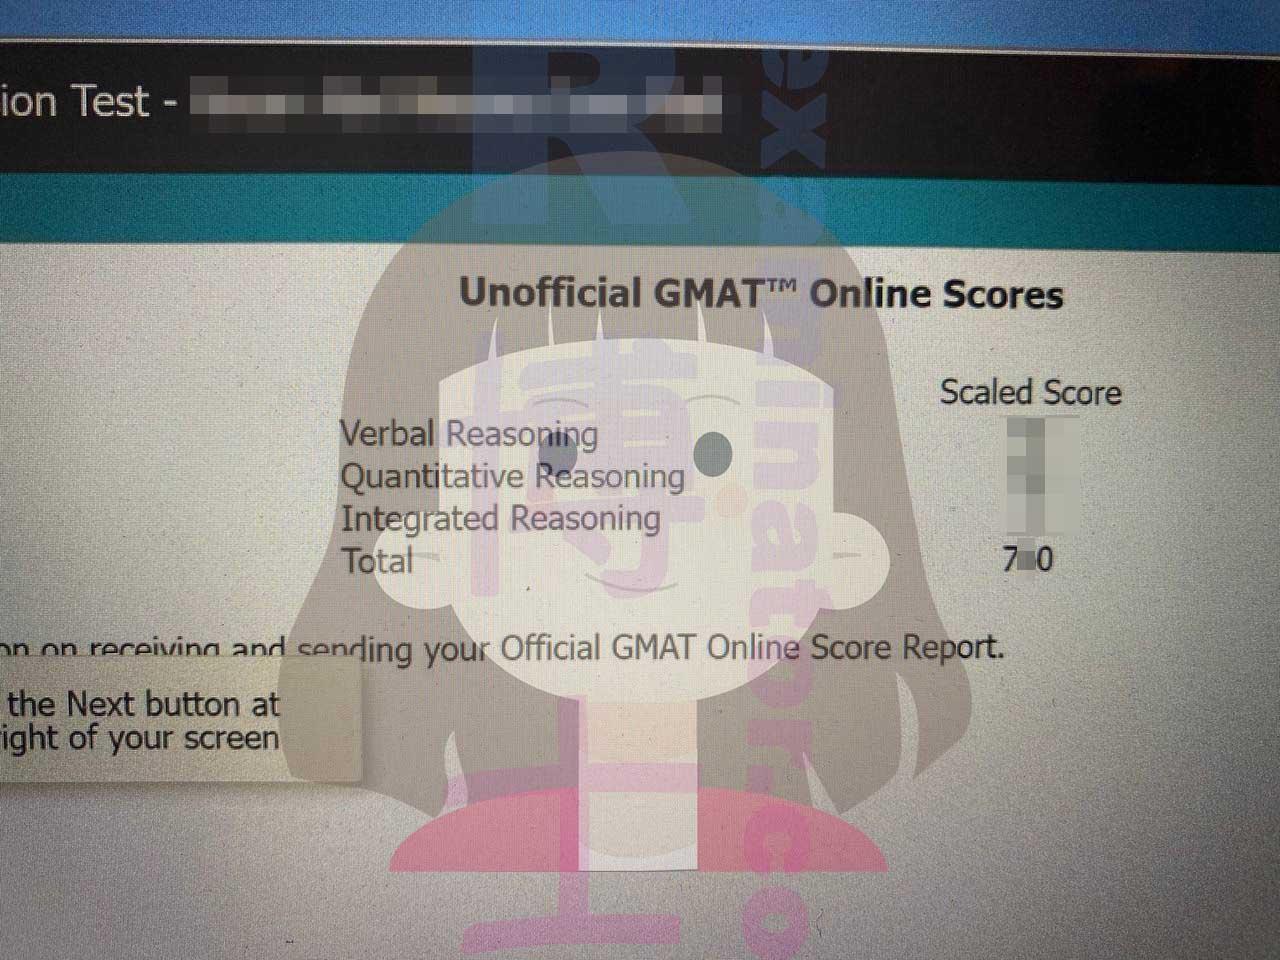 score image for GMAT Cheating success story #491